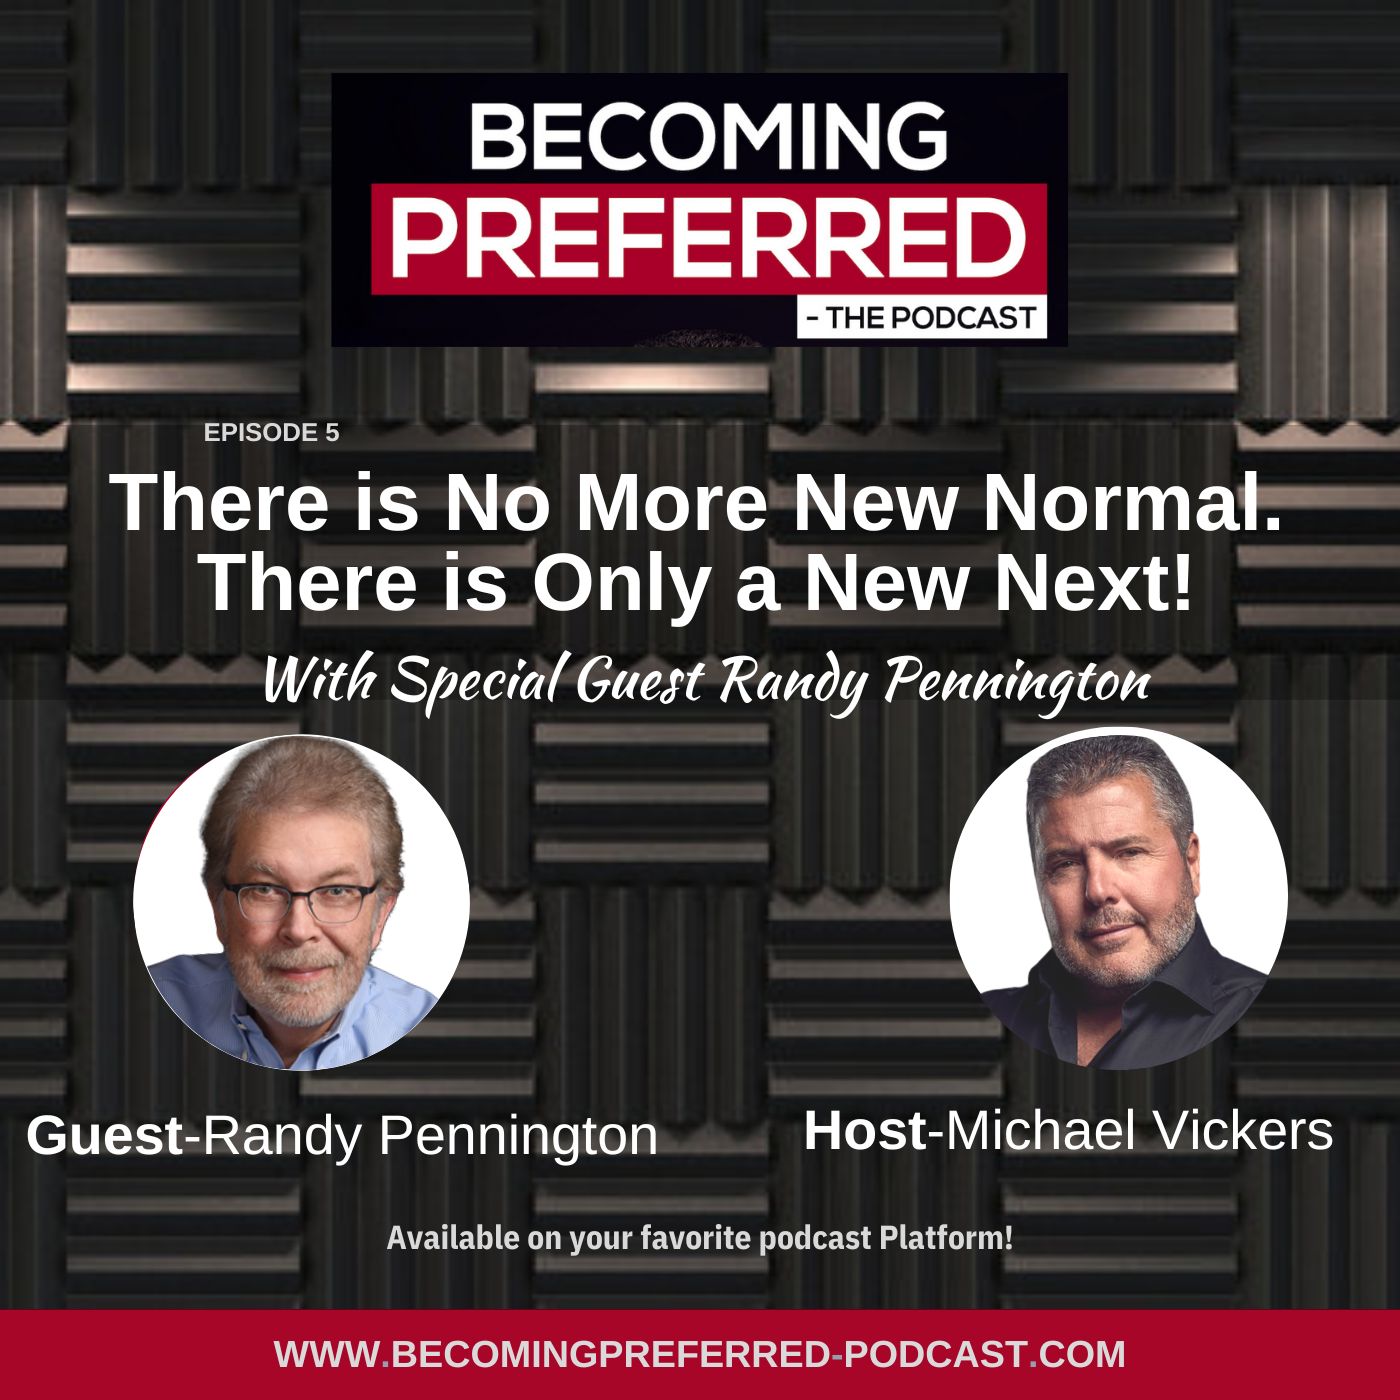 Artwork for podcast Becoming Preferred